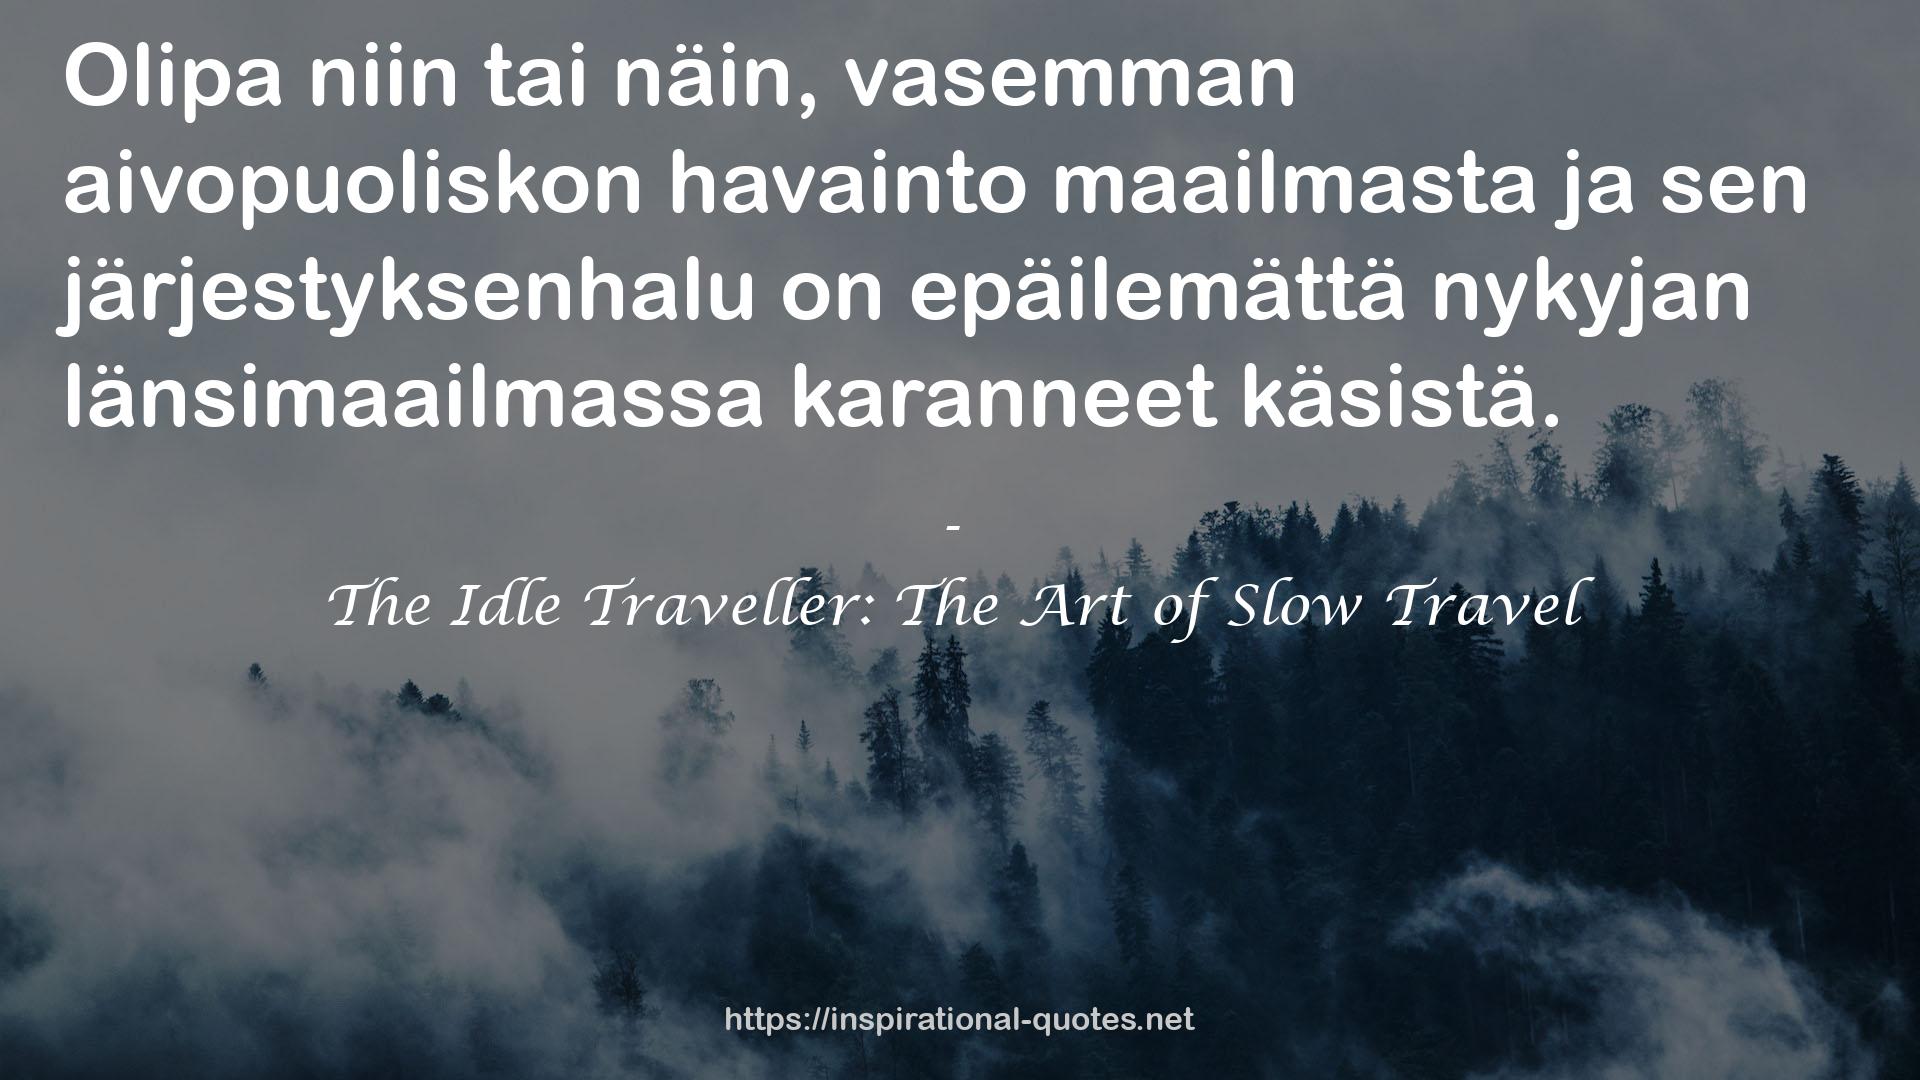 The Idle Traveller: The Art of Slow Travel QUOTES